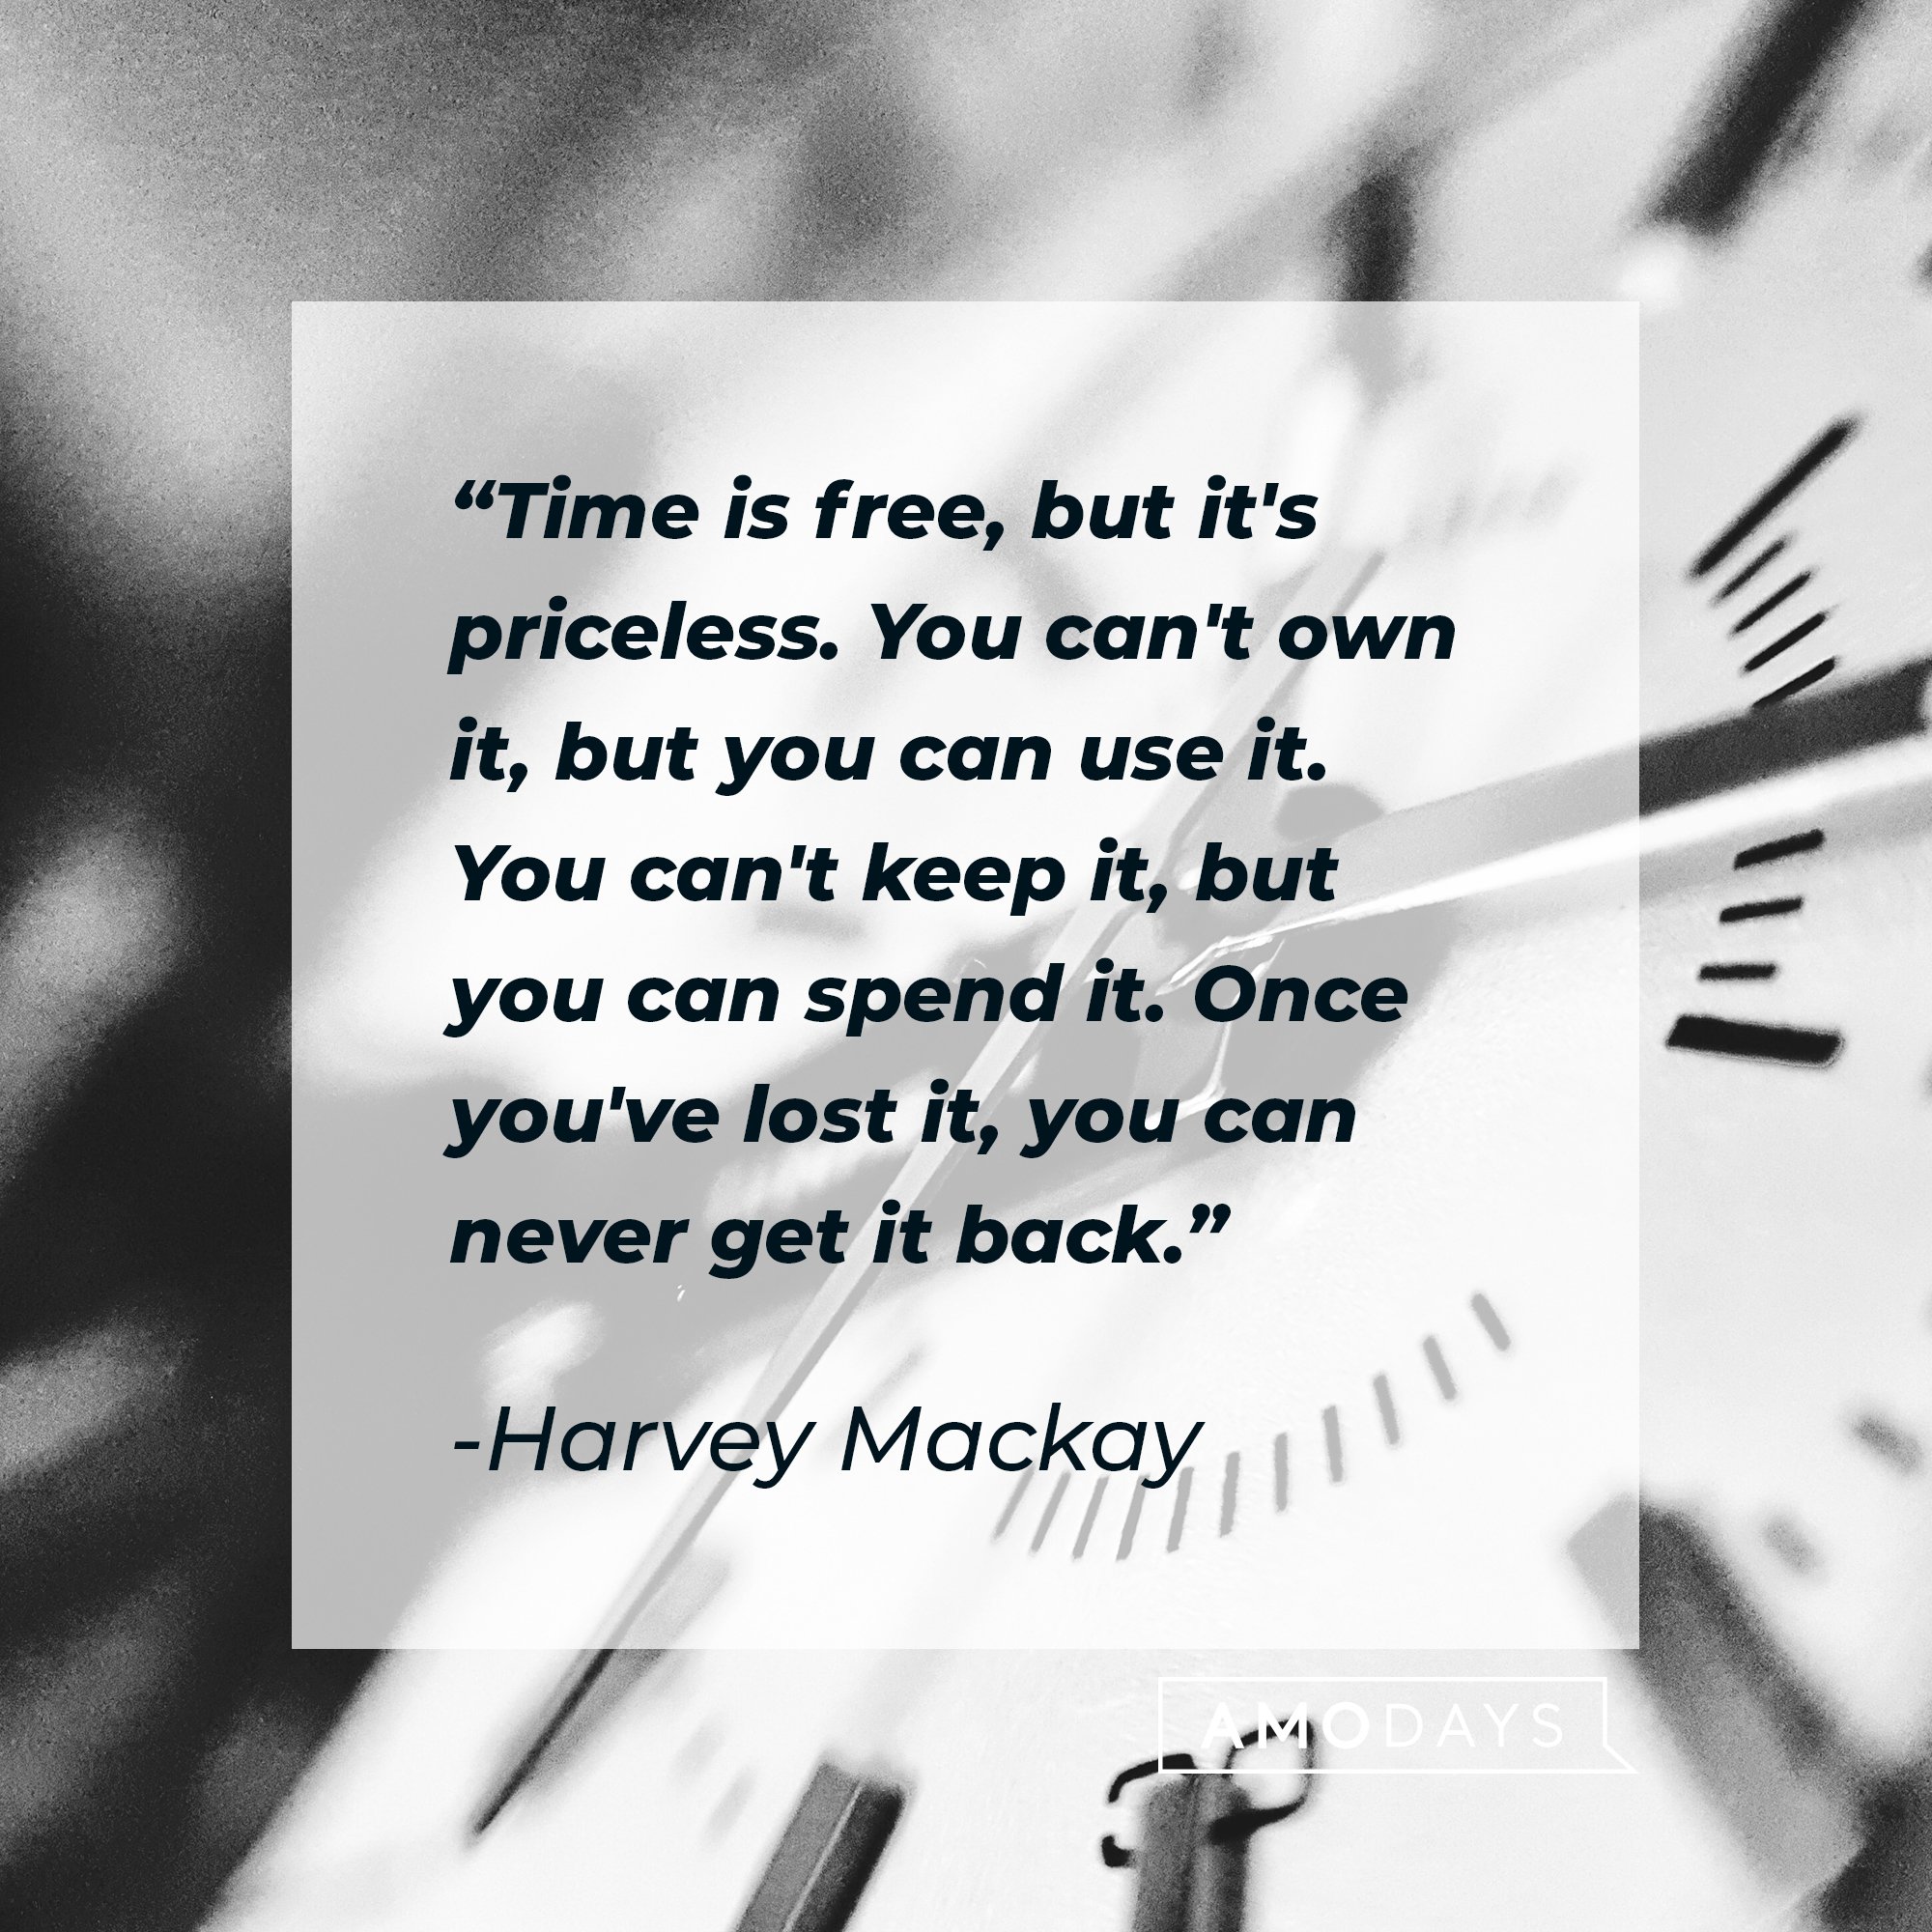  Harvey Mackay’s quote: "Time is free, but it's priceless. You can't own it, but you can use it. You can't keep it, but you can spend it. Once you've lost it, you can never get it back."  | Image: AmoDays   